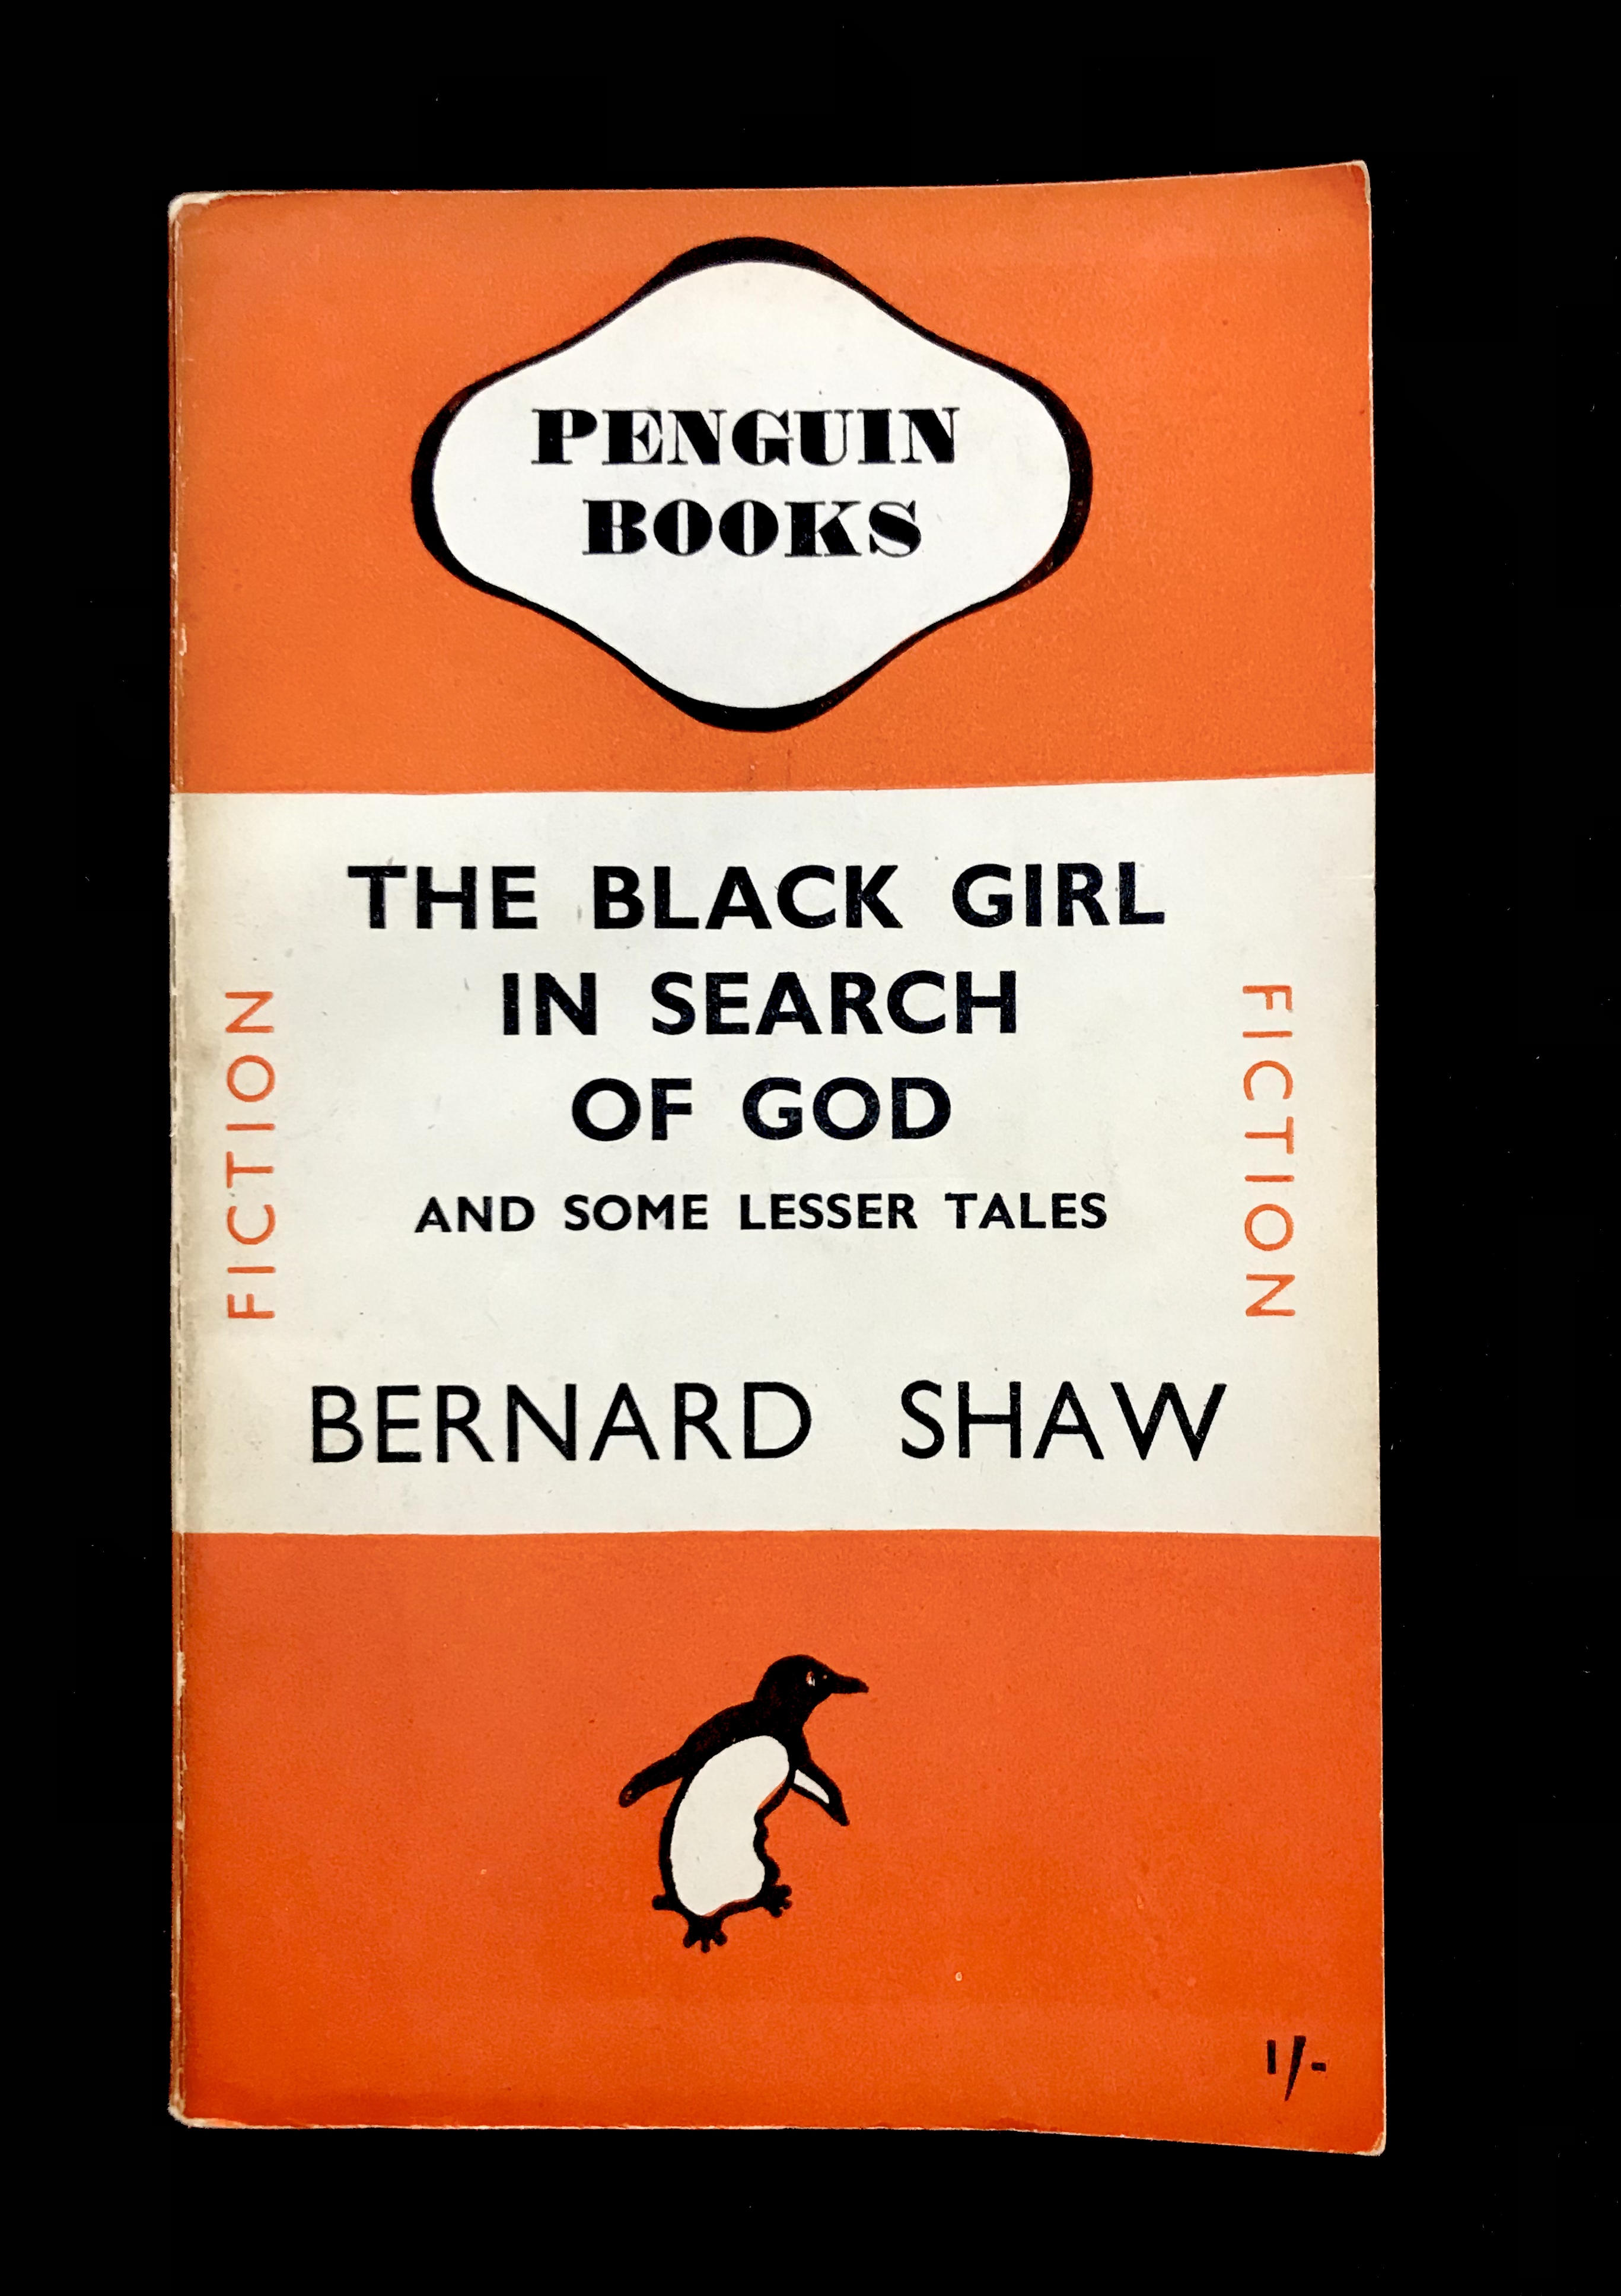 The Black Girl In Search Of God by Bernard Shaw